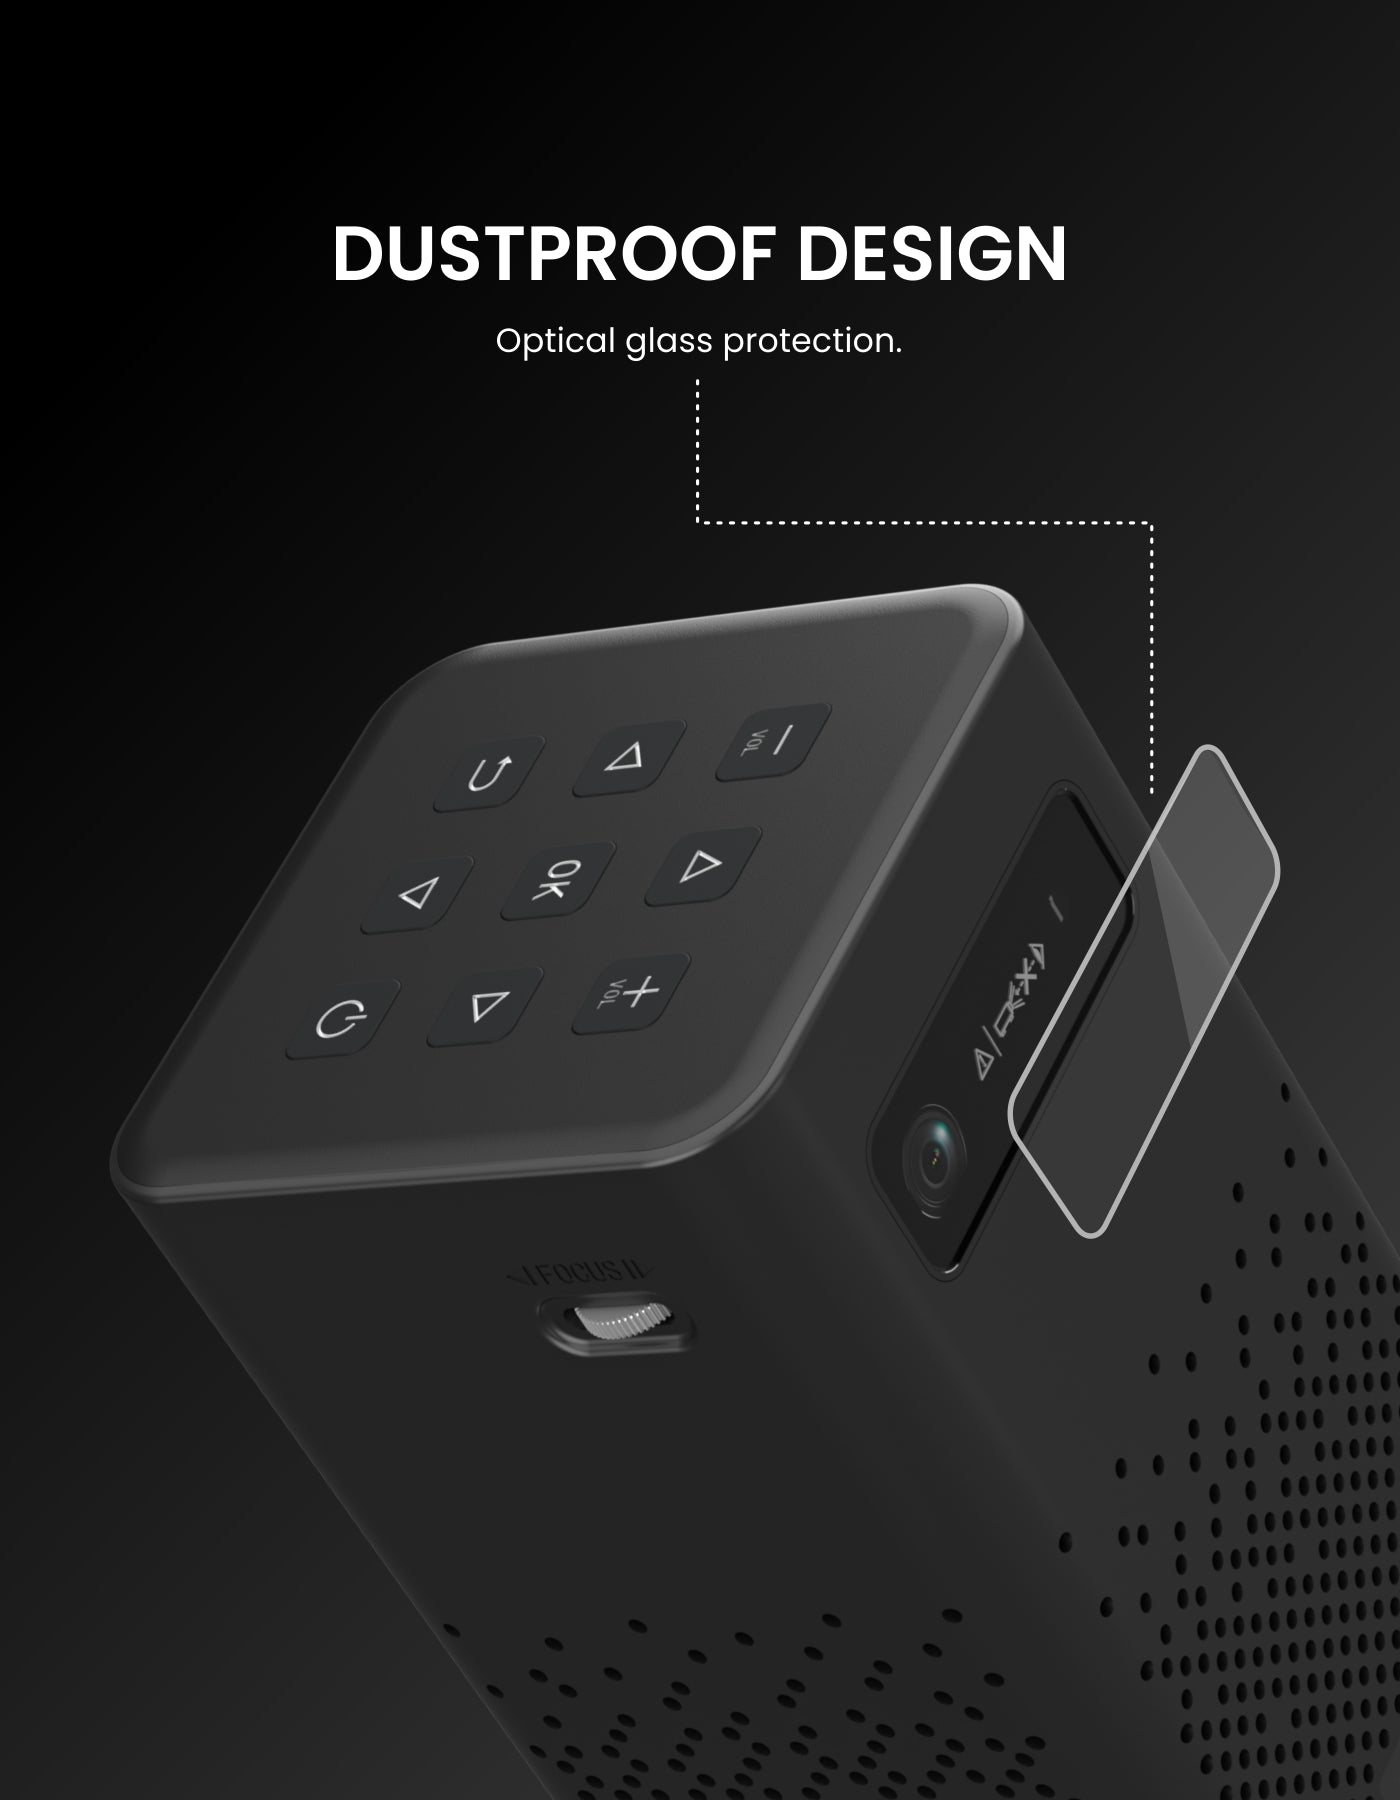 Dust proof design optical glass protection Portronics Pico 11 portable/smart/ bluetooth projector